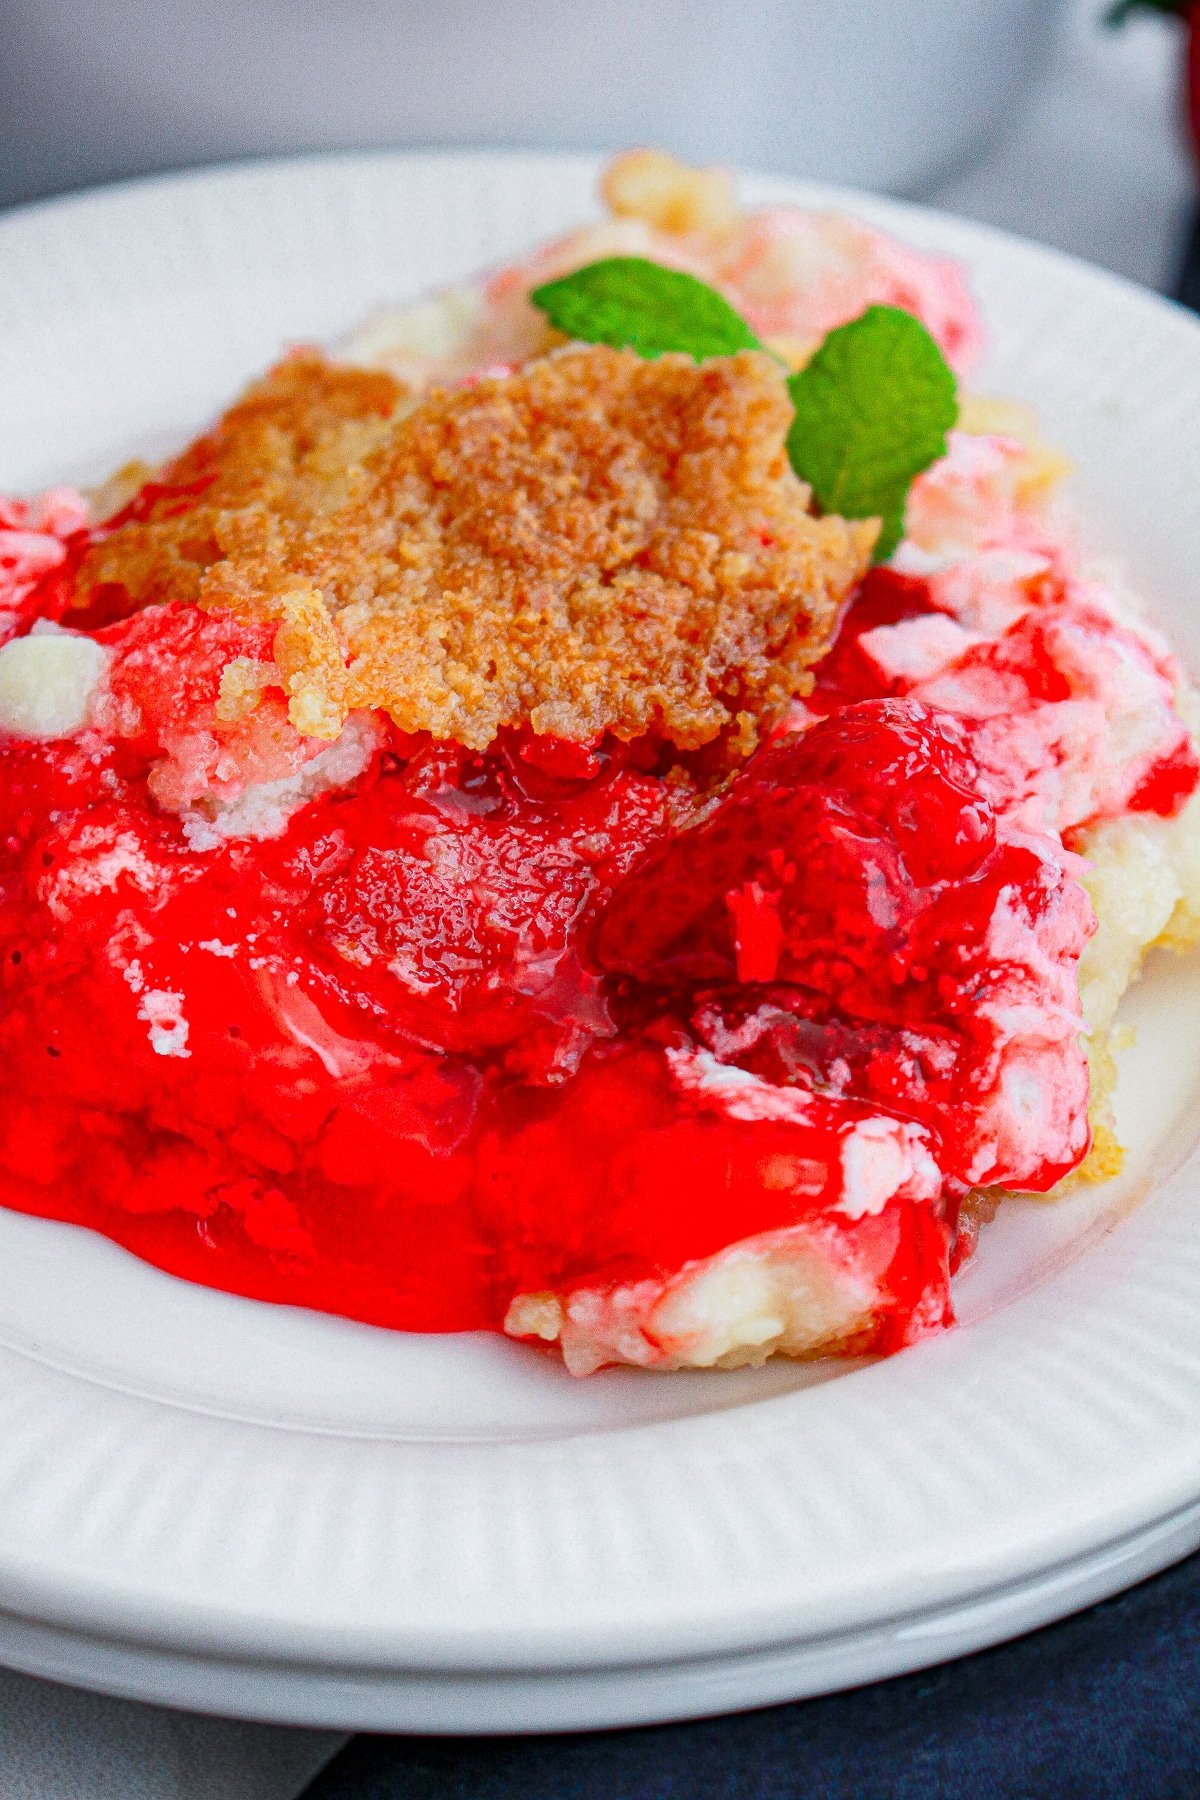 Strawberry Dump Cake served on a white plate